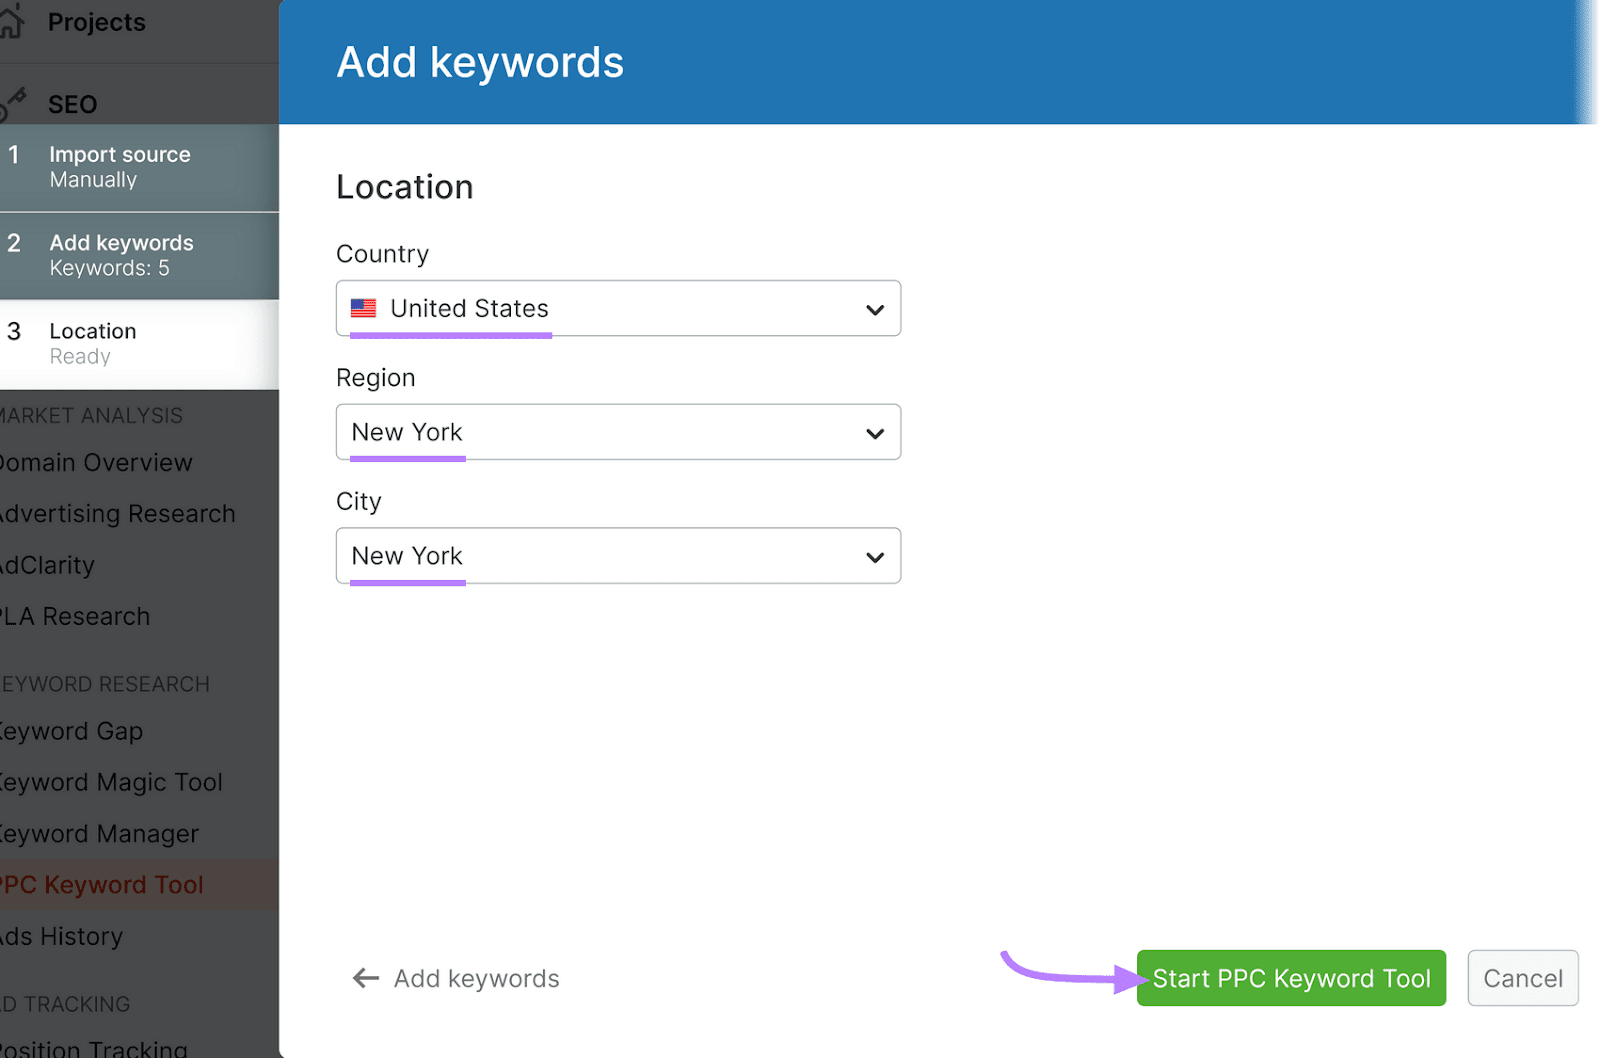 PPC Keyword Tool interface for adding keywords with location fields and a "Start PPC Keyword Tool" button.